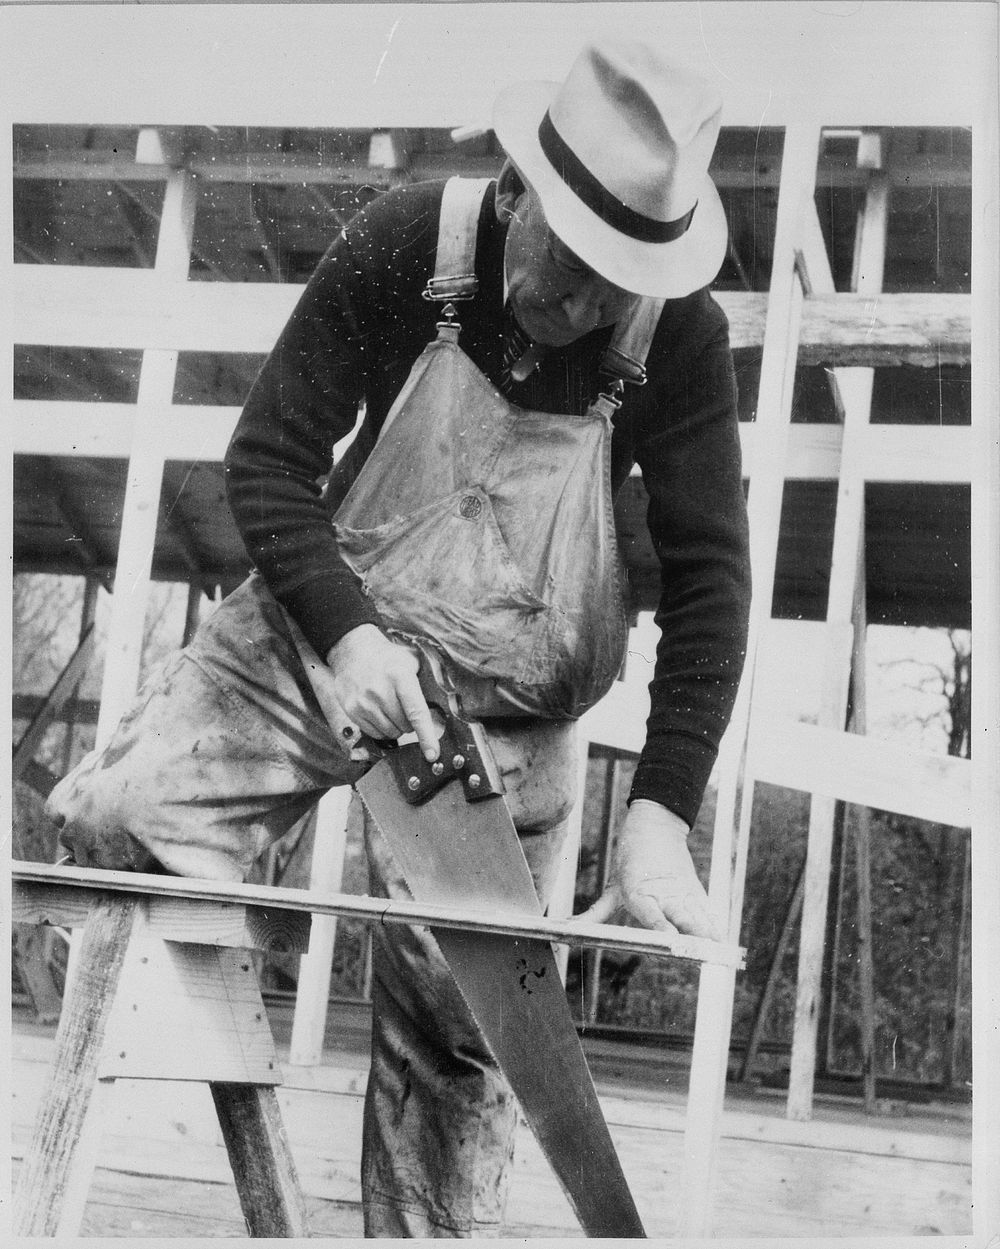 Carpenter at the Berwyn project, Maryland. Sourced from the Library of Congress.